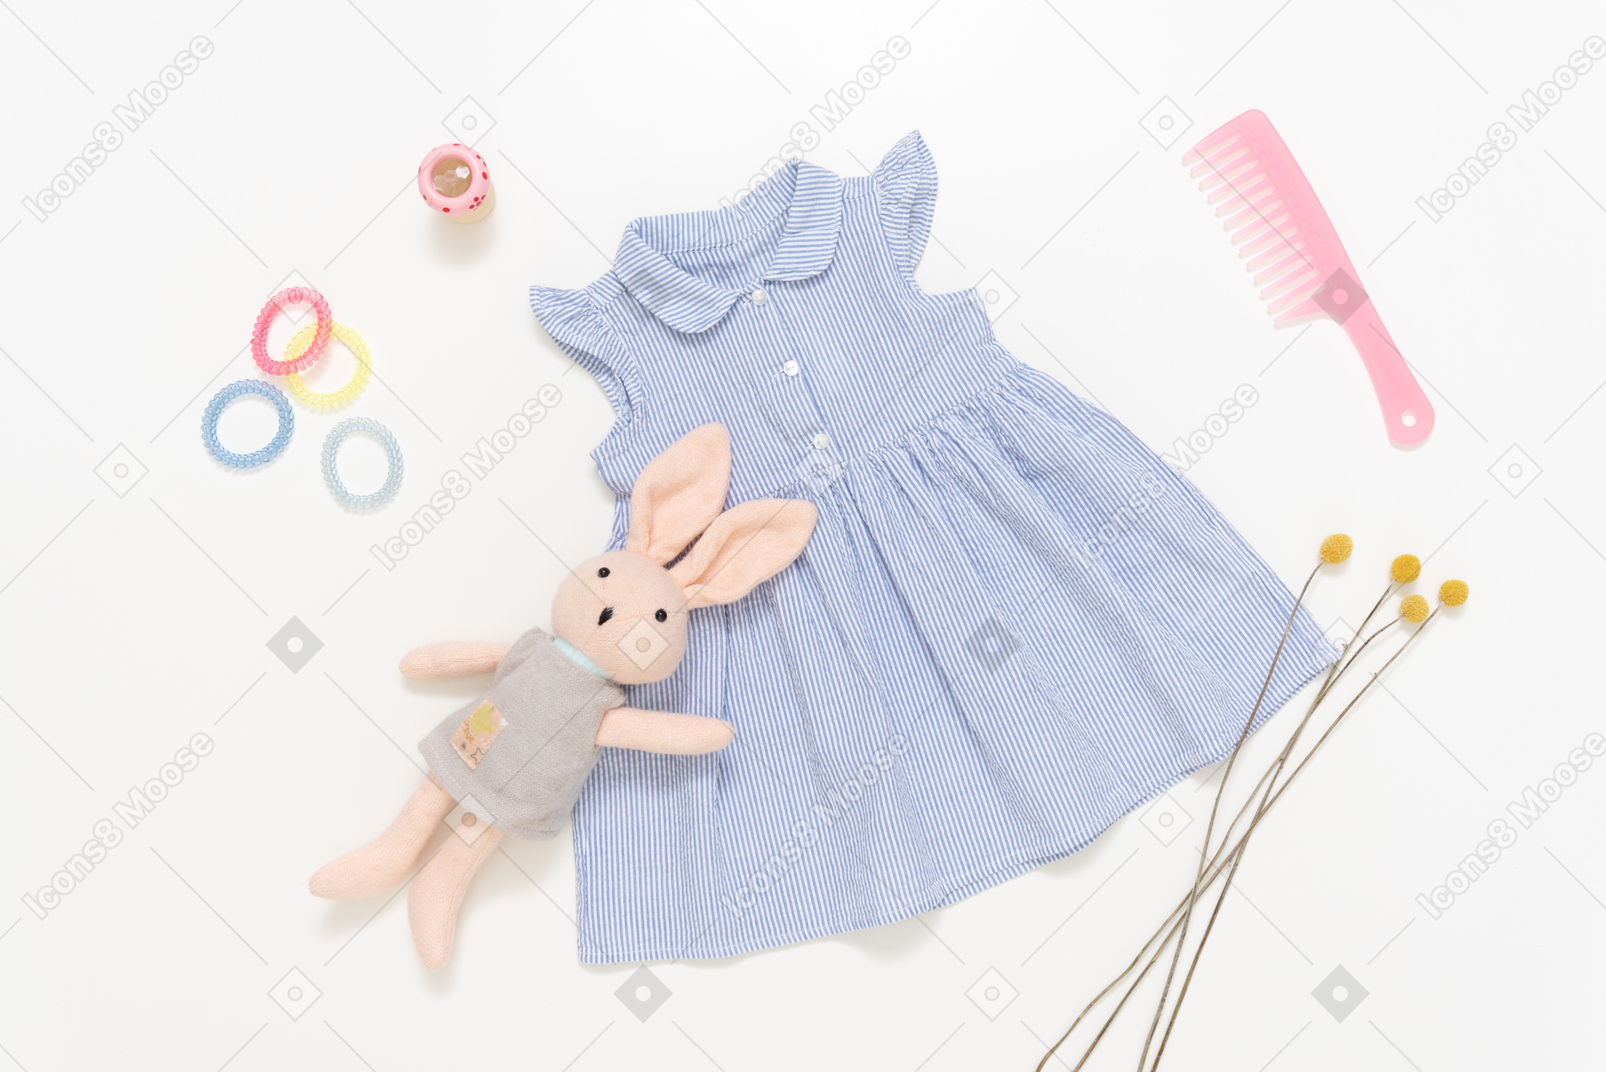 Kid girl's blue dress, stuffed toy, pink plastic hairbrush and accessories